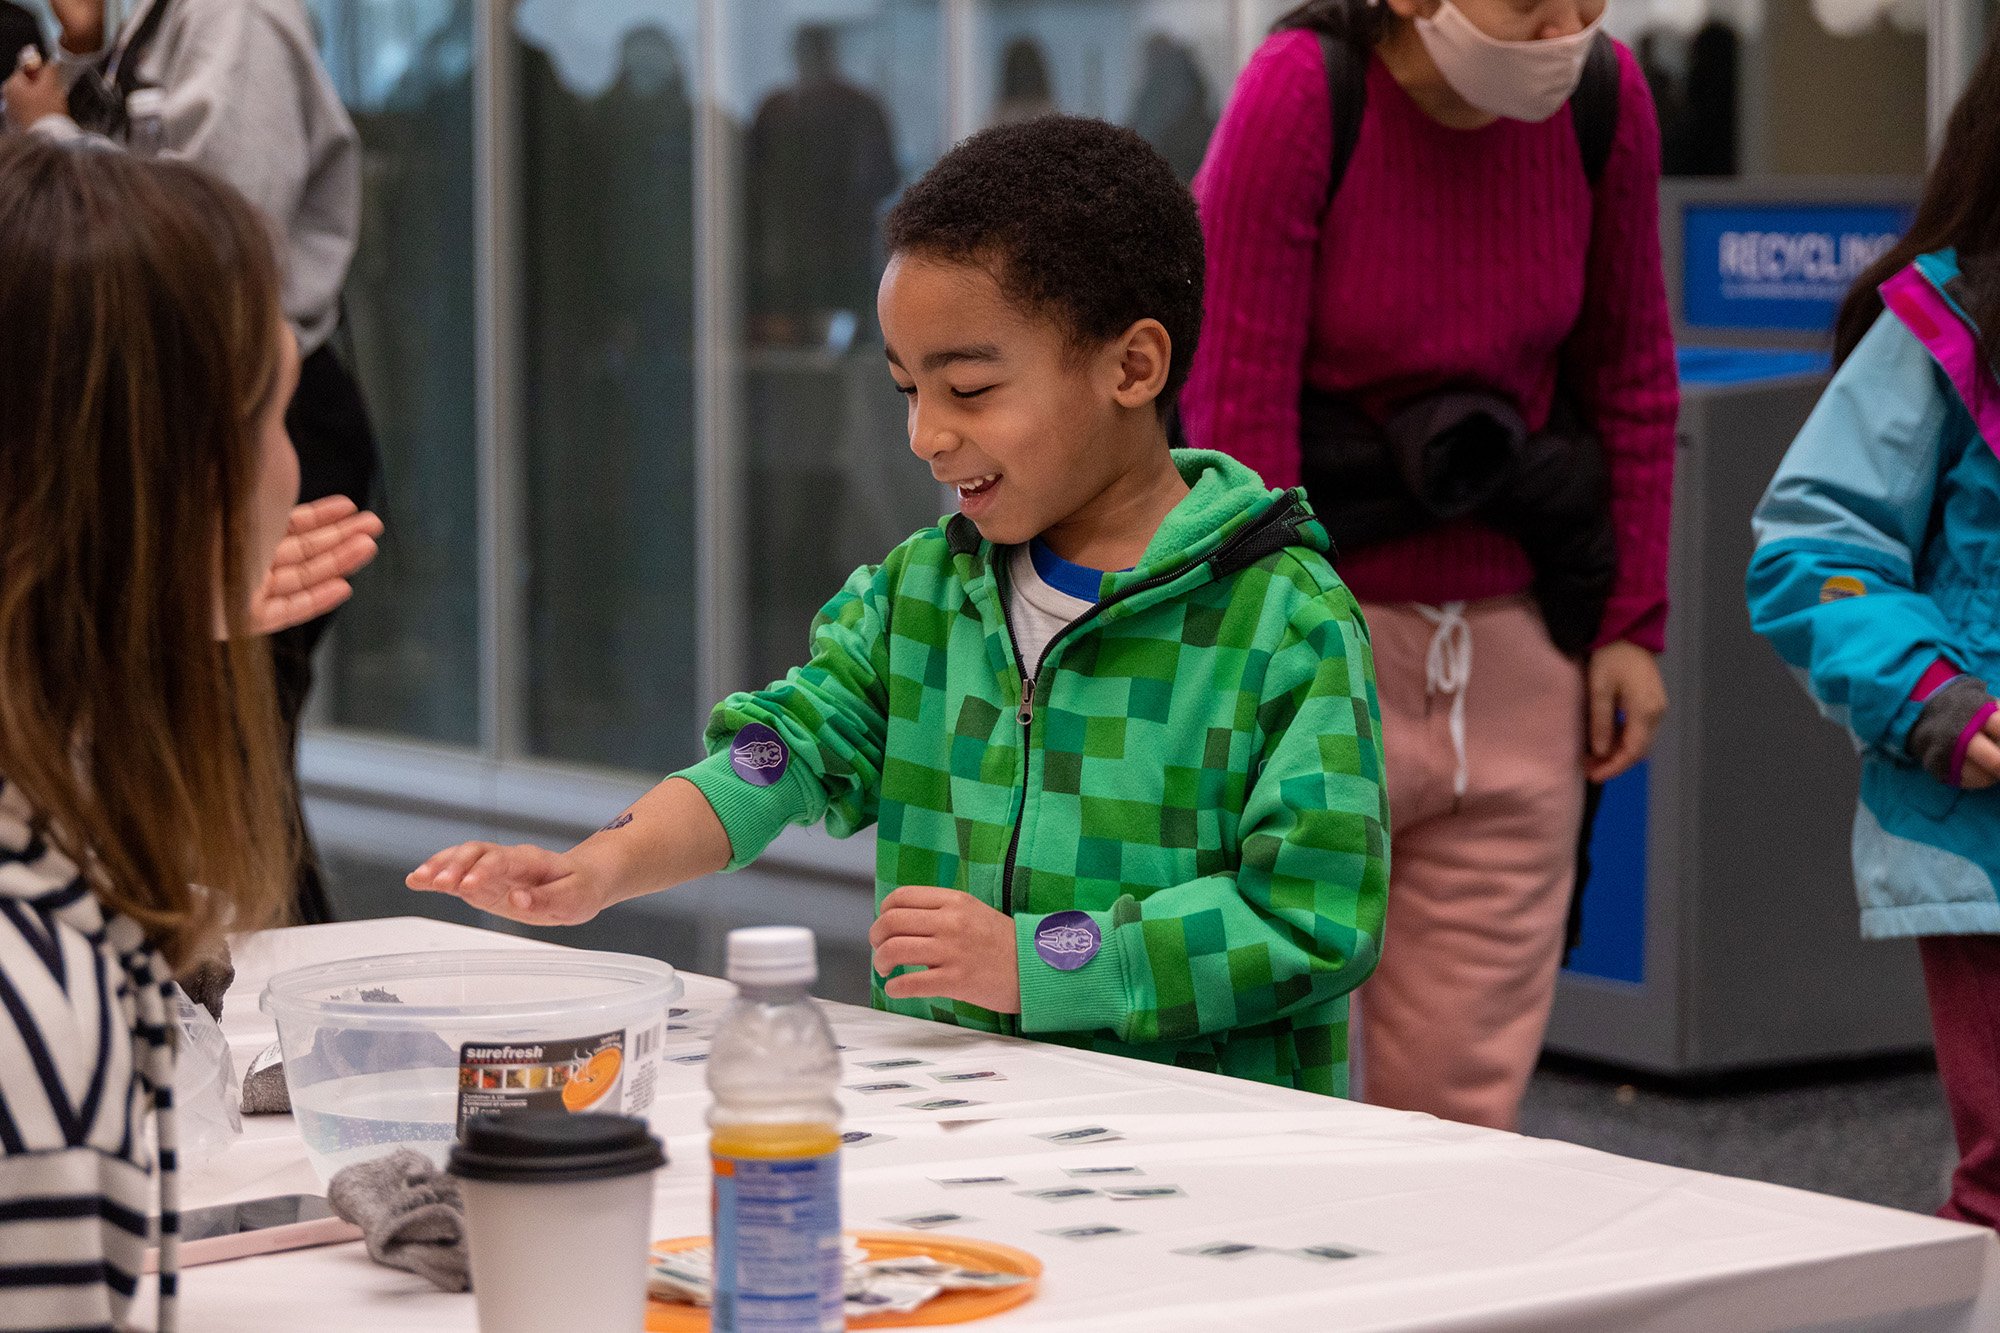 A young boy takes part in a table-top experiment at UAlbany's STEM & Nanotechnology Family Day at ETEC.